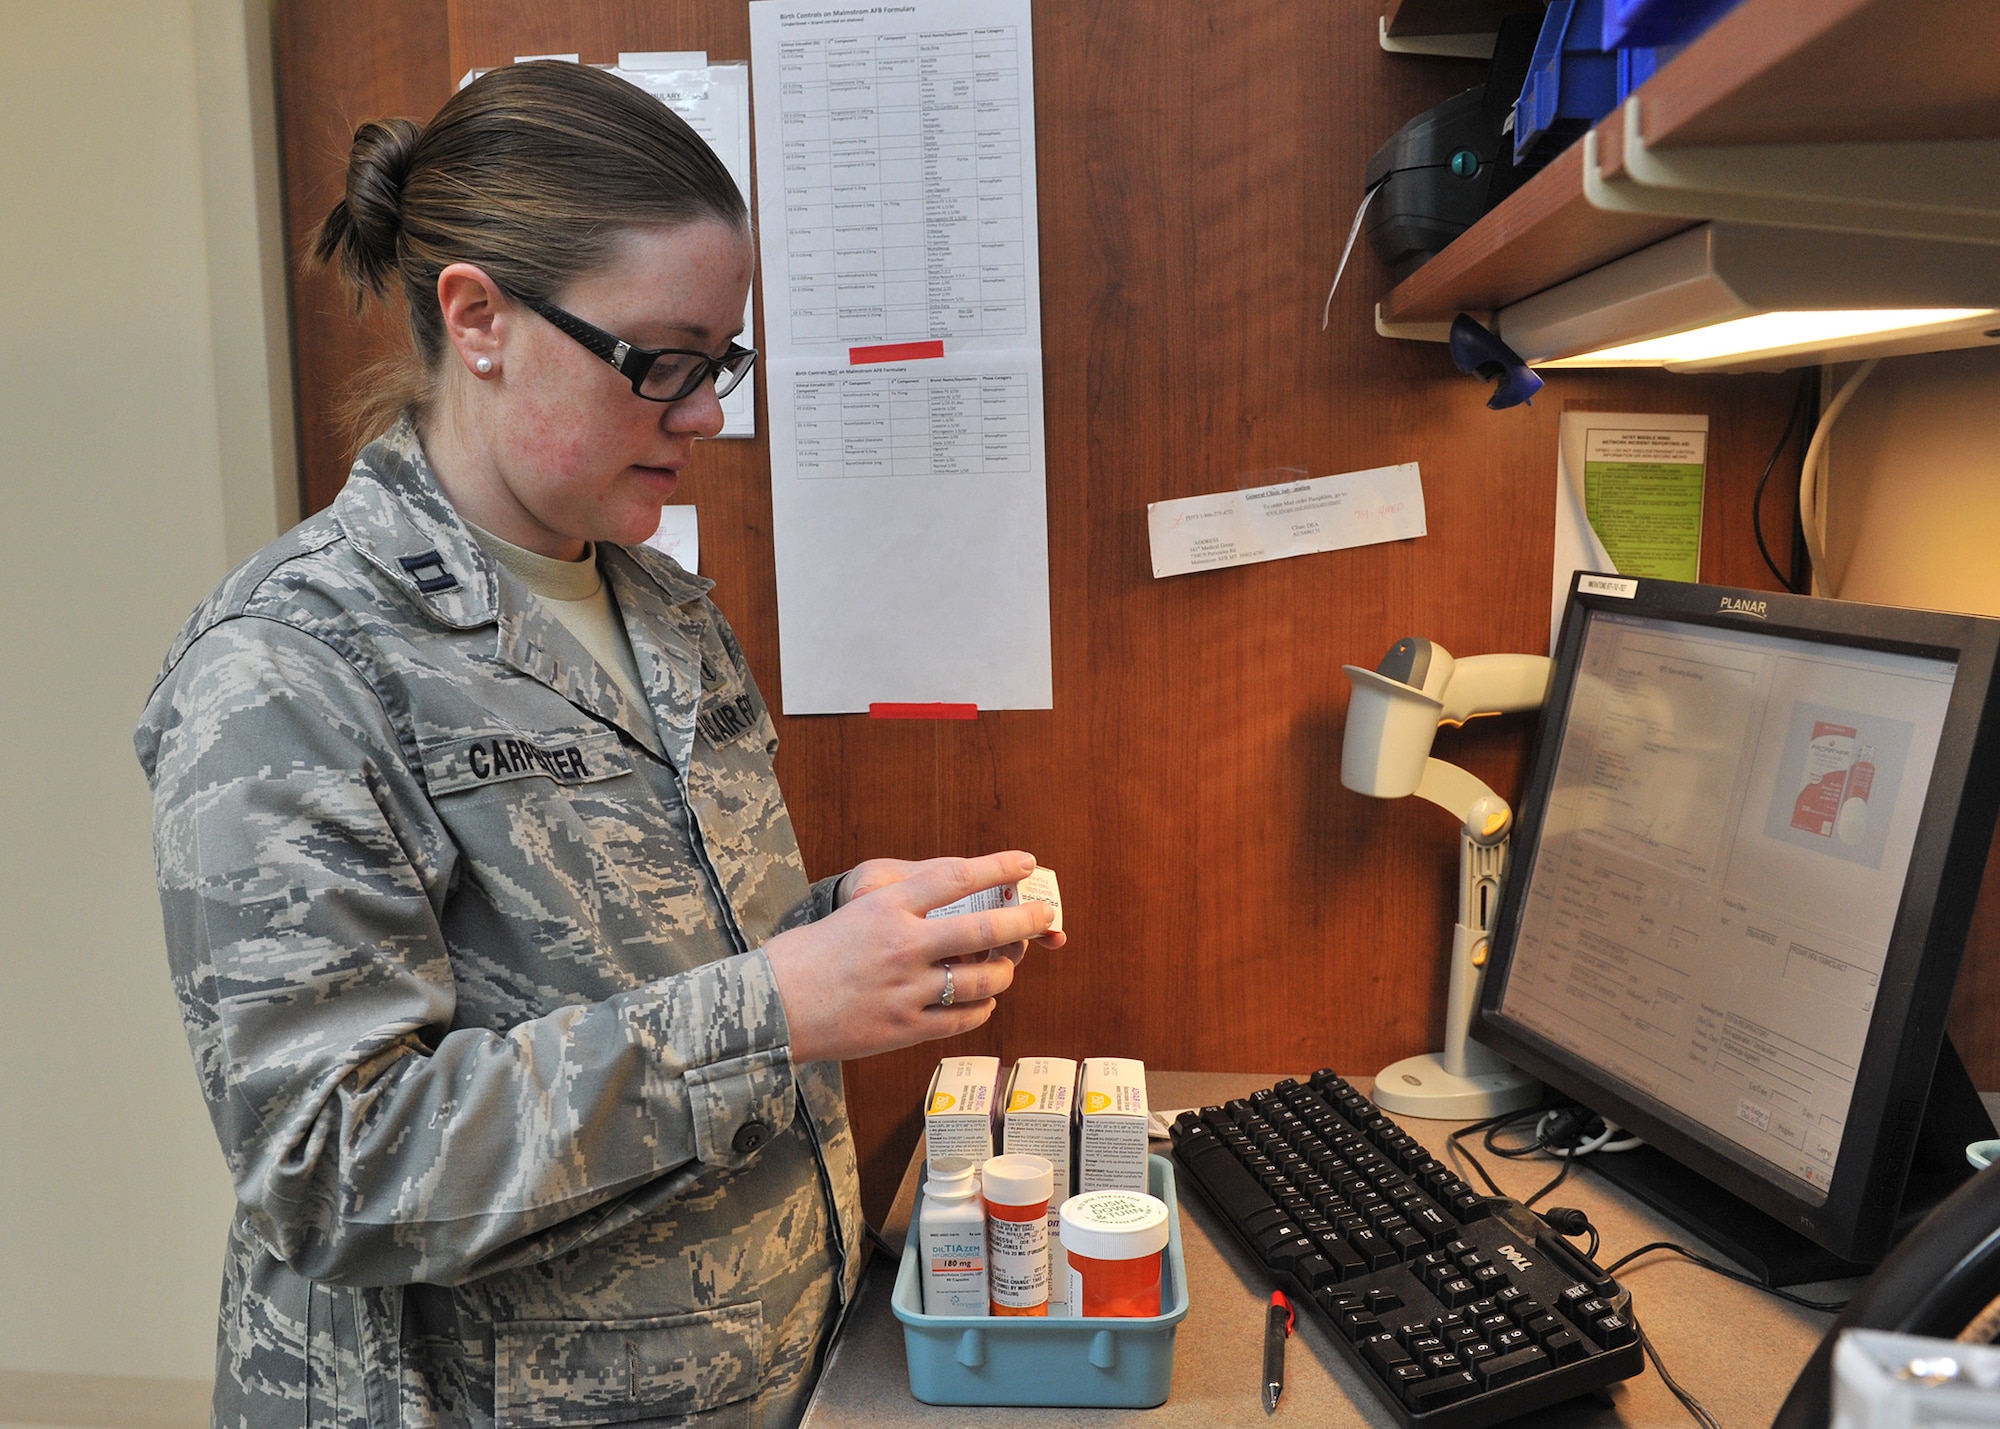 Capt. Julie Carpenter, 341st Medical Support Squadron pharmacist, verifies medications Jan. 27 at the Malmstrom Air Force Base, Mont., pharmacy.  Carpenter’s favorite part of her job is talking with patients about their therapies. She also confers with doctors, reports best practices within the pharmacy, and suggests items that can be added to the formulary. (U.S. Air Force photo/John Turner)